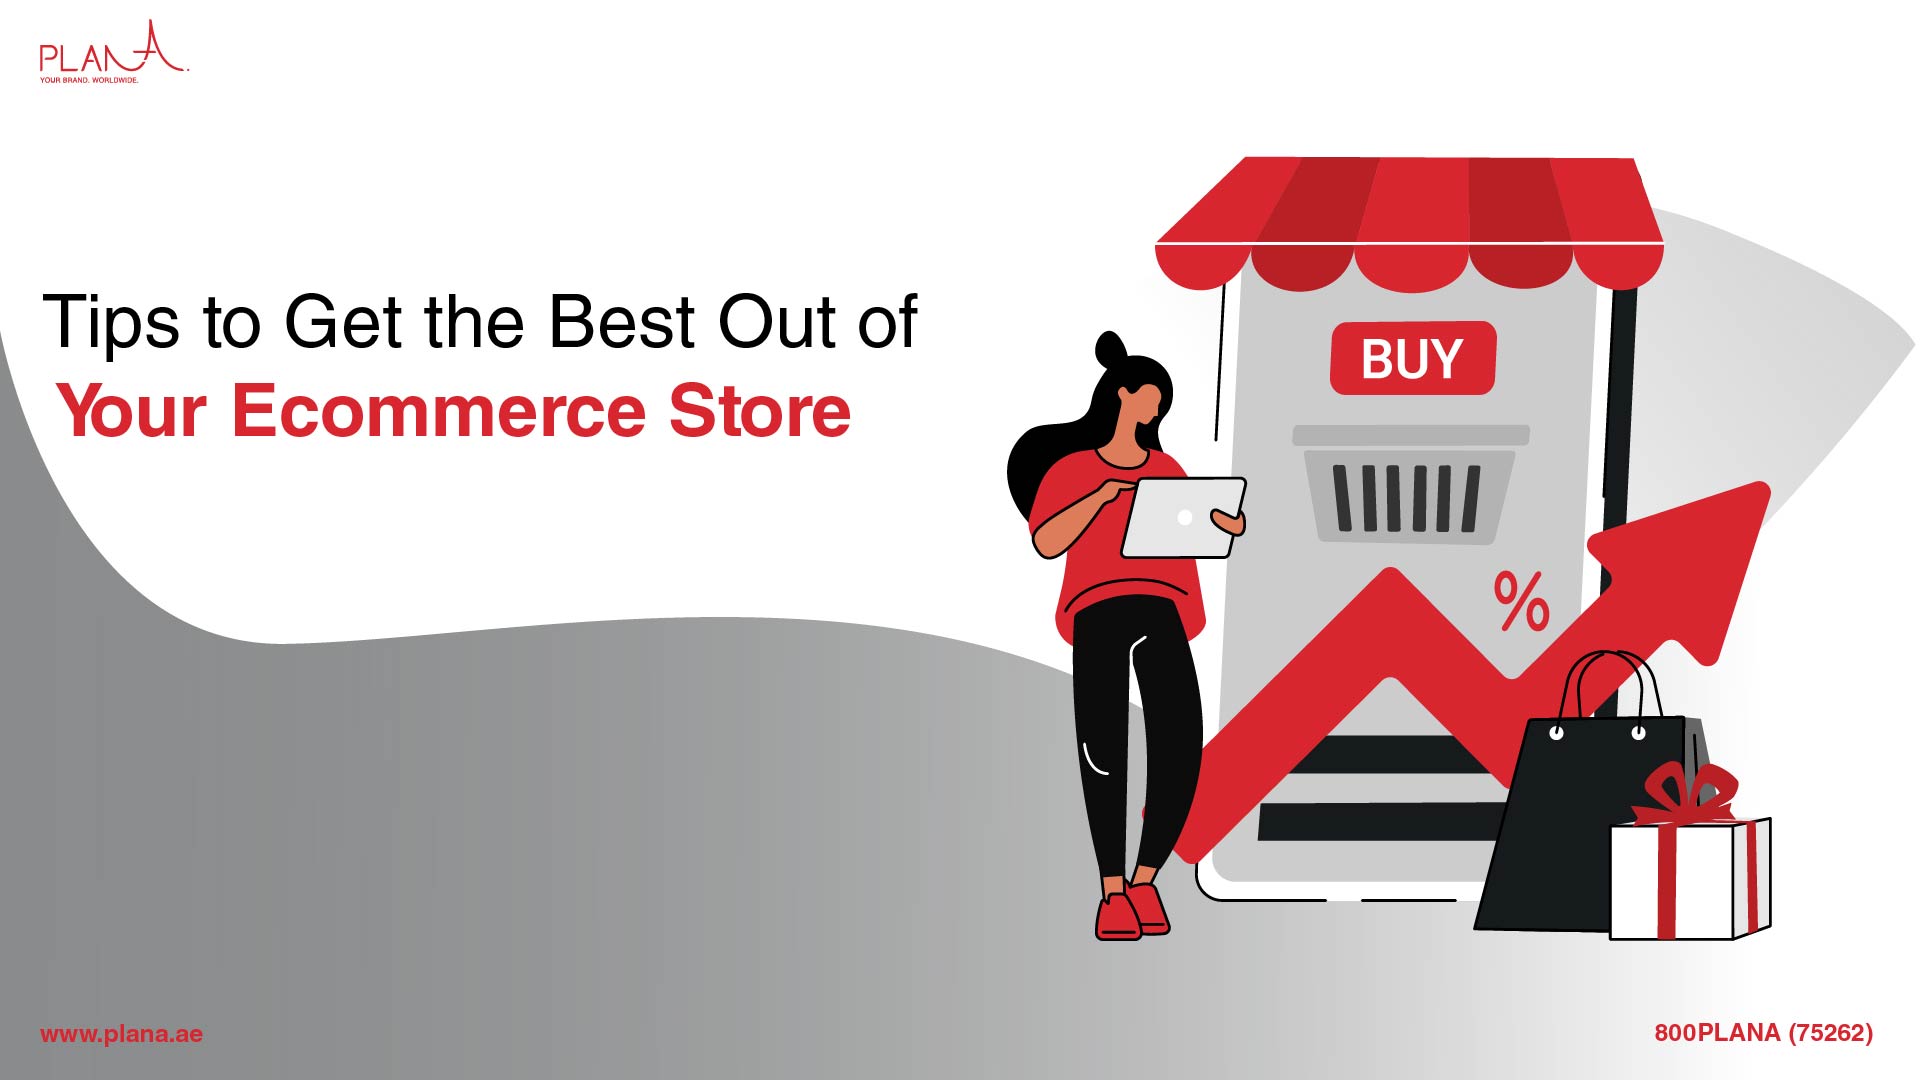 Tips to Get the Best Out of Your Ecommerce Store